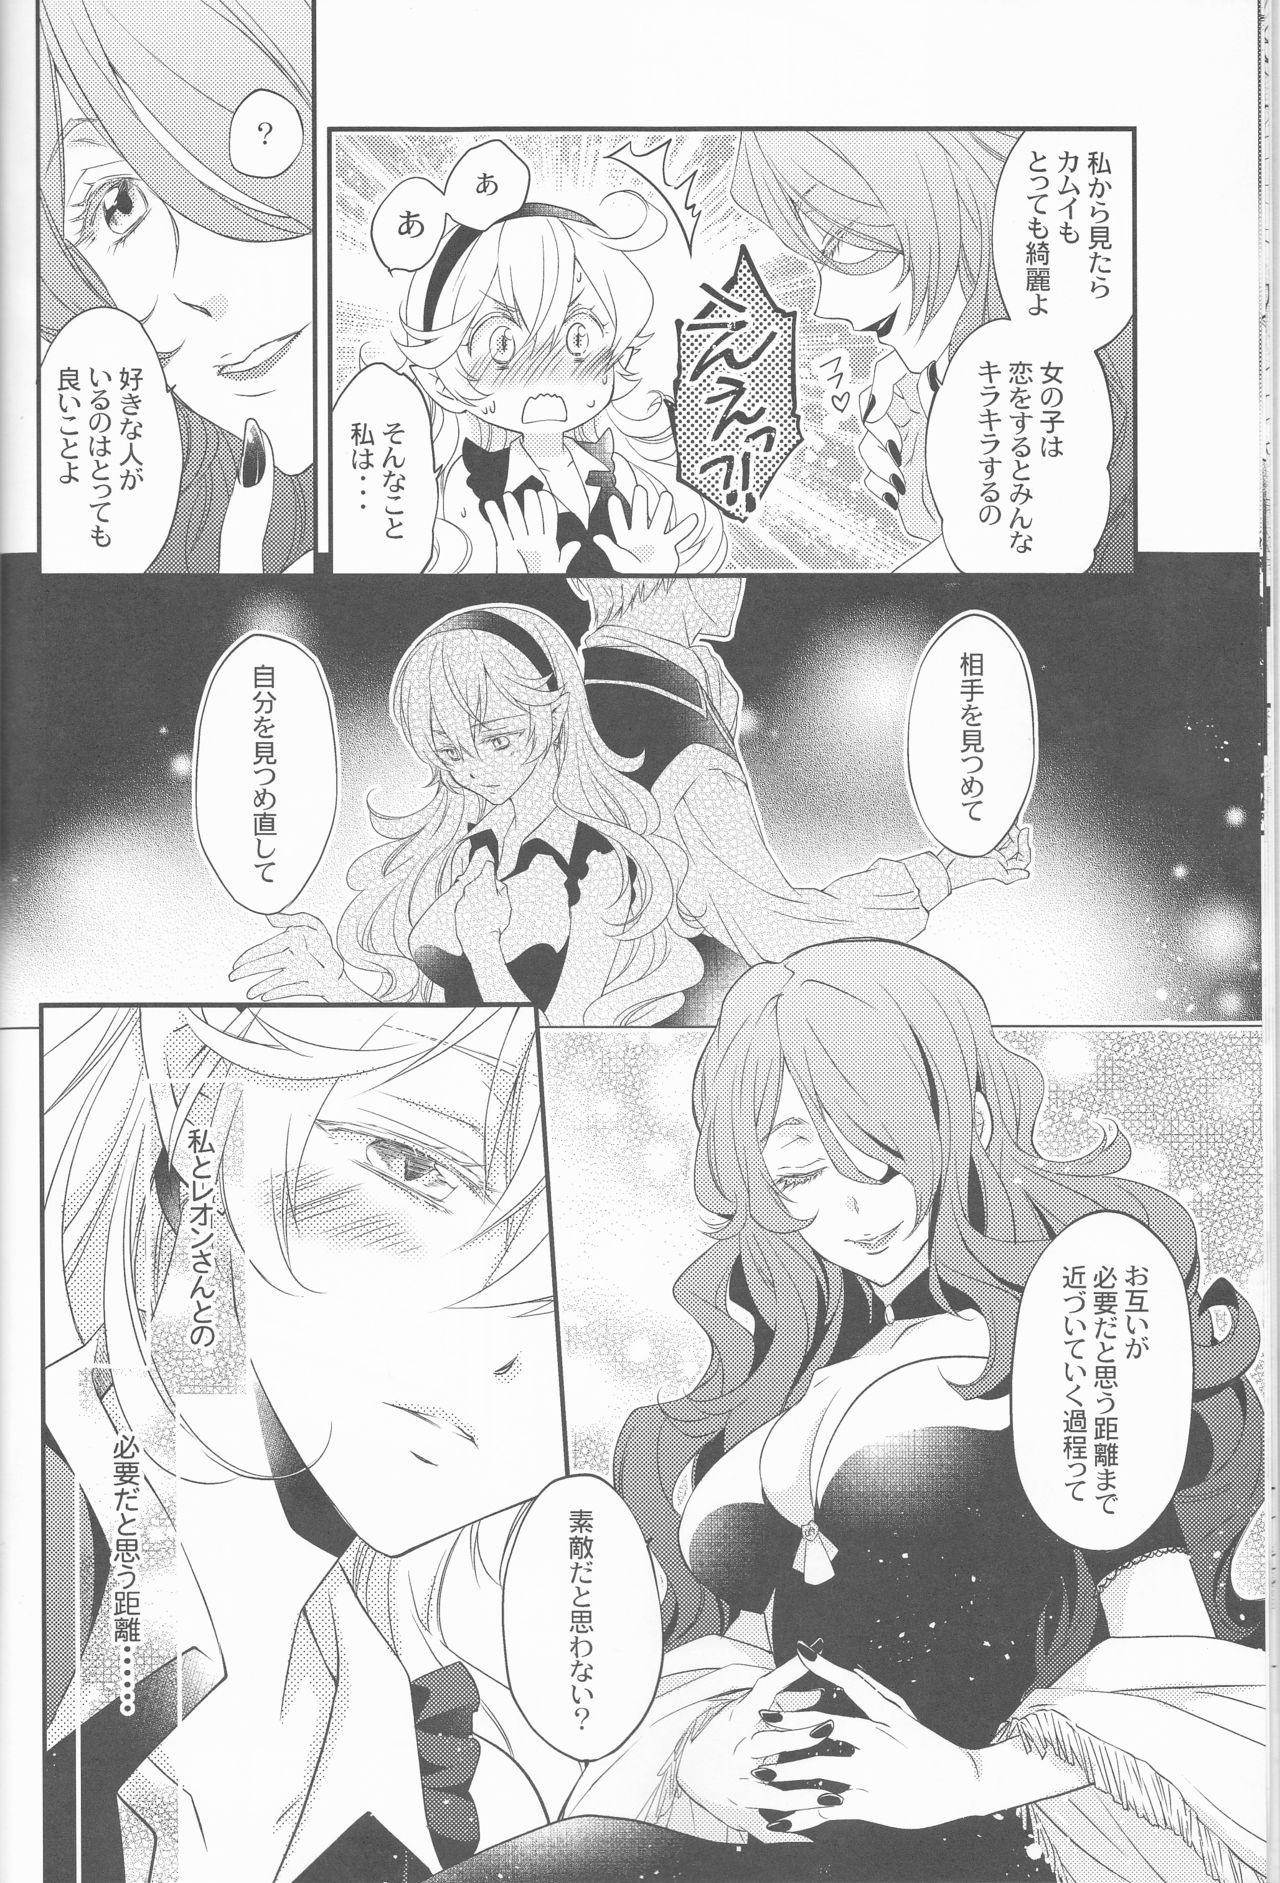 Leaked CROSSING LOVE - Fire emblem if Smoking - Page 12